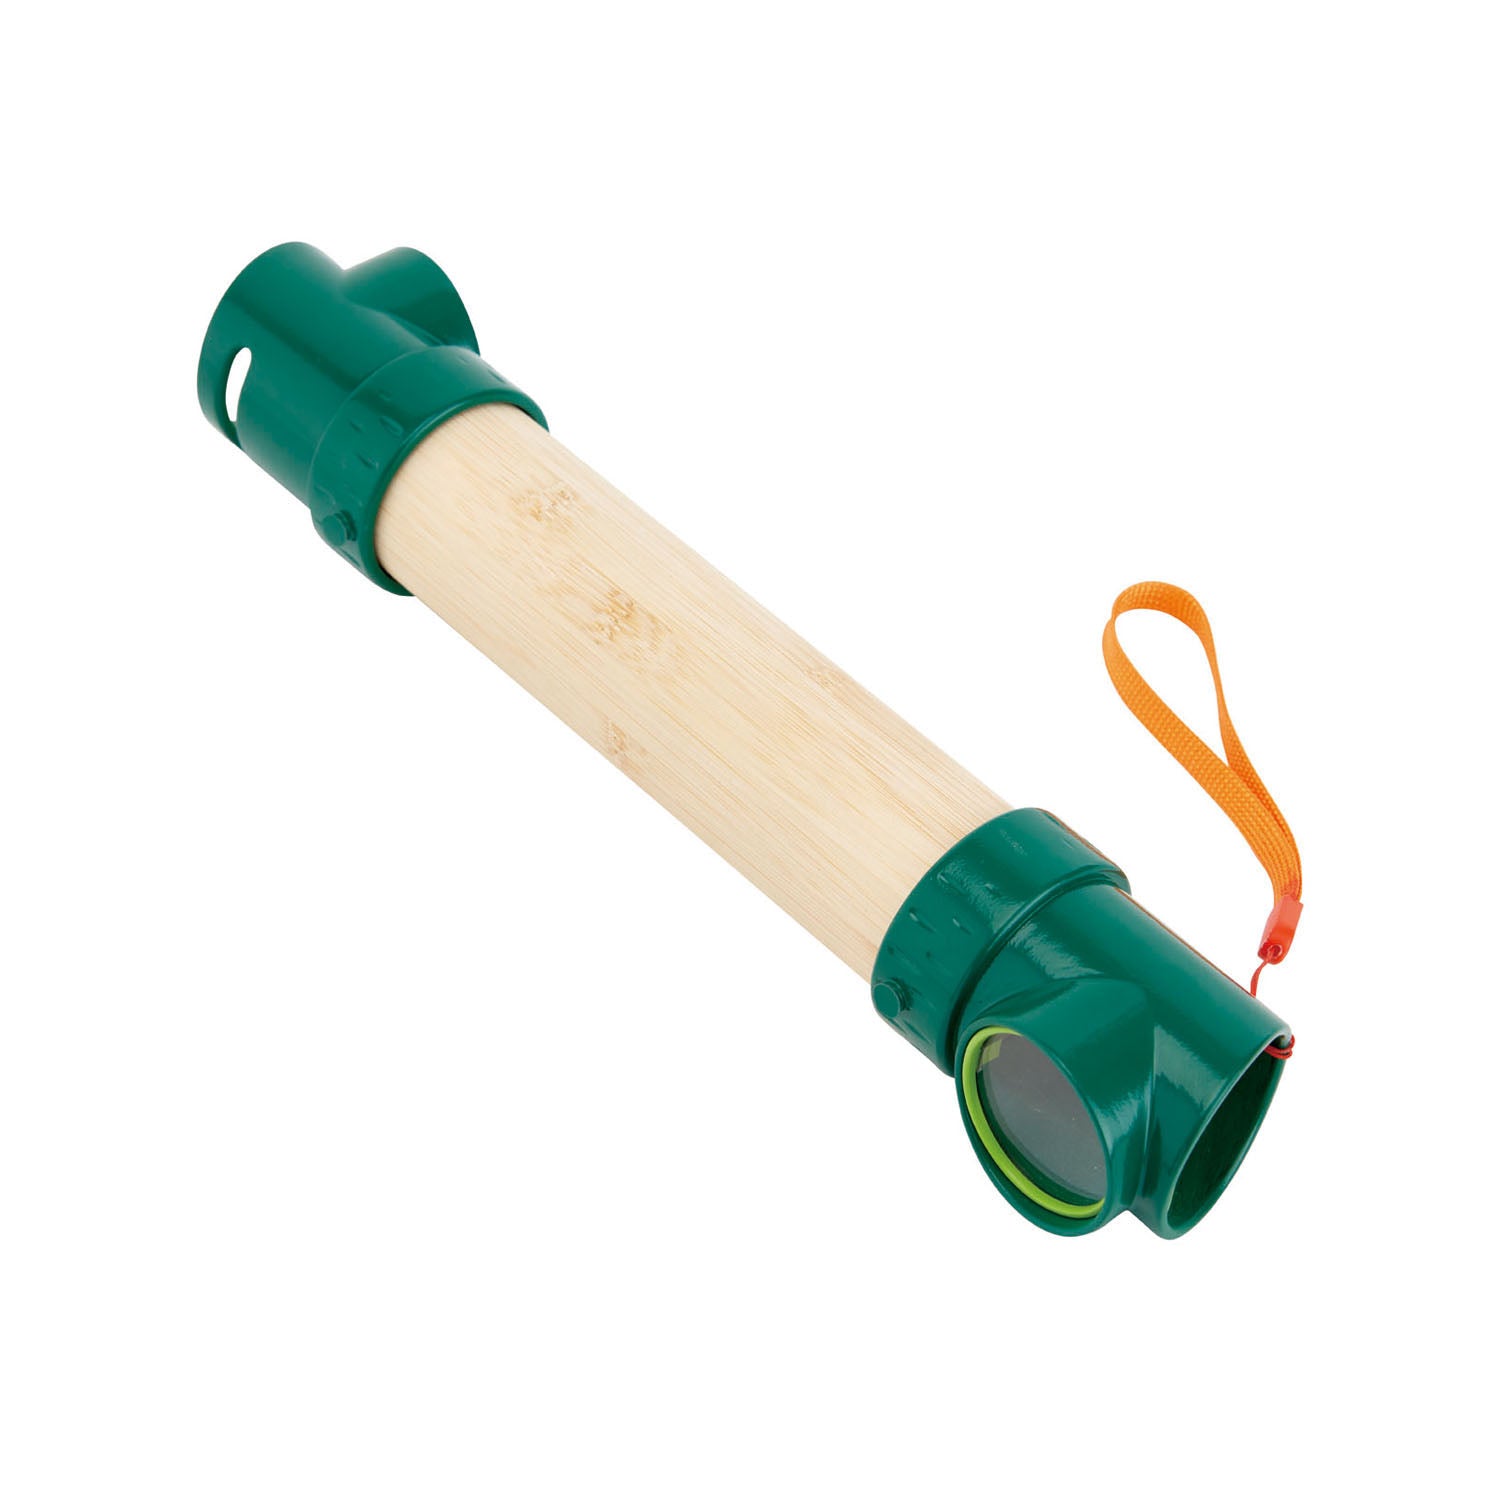 Hape Periscope, Hide-and-Seek Periscope, Made from Sustainable Bamboo,  Nature Fun Outdoor Toys. 3 Years + : : Juguetes y juegos